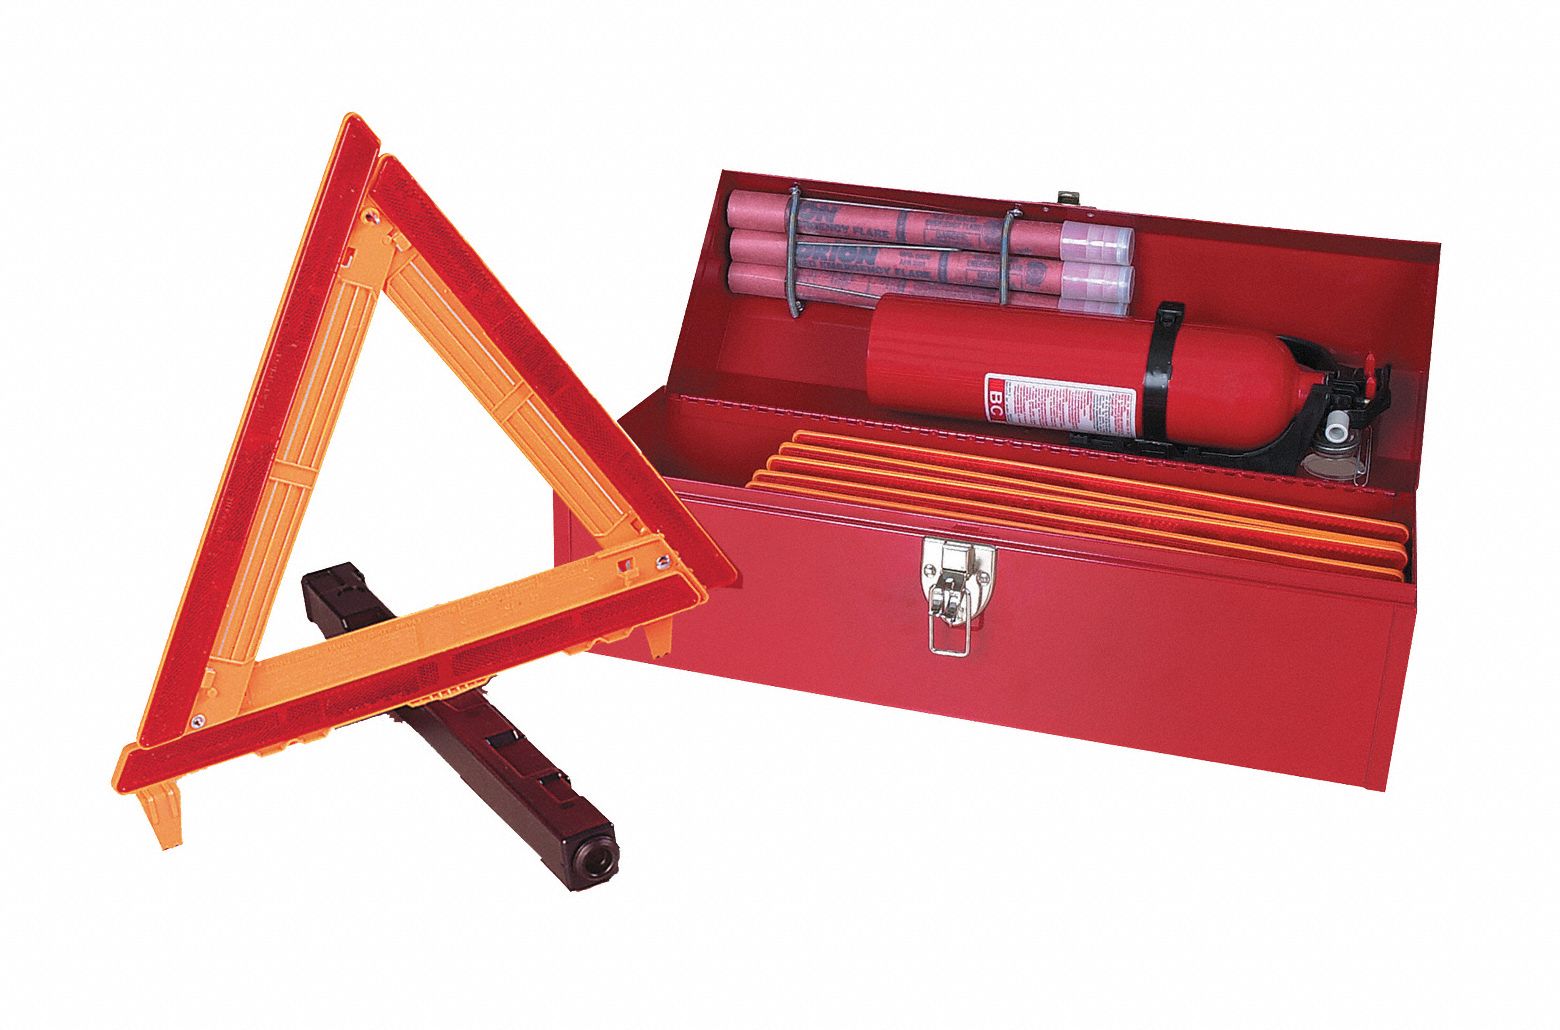 Roadside Emergency Kit with Warning Triangle: 3 Triangles, 7 Pieces, 10 in Overall Ht